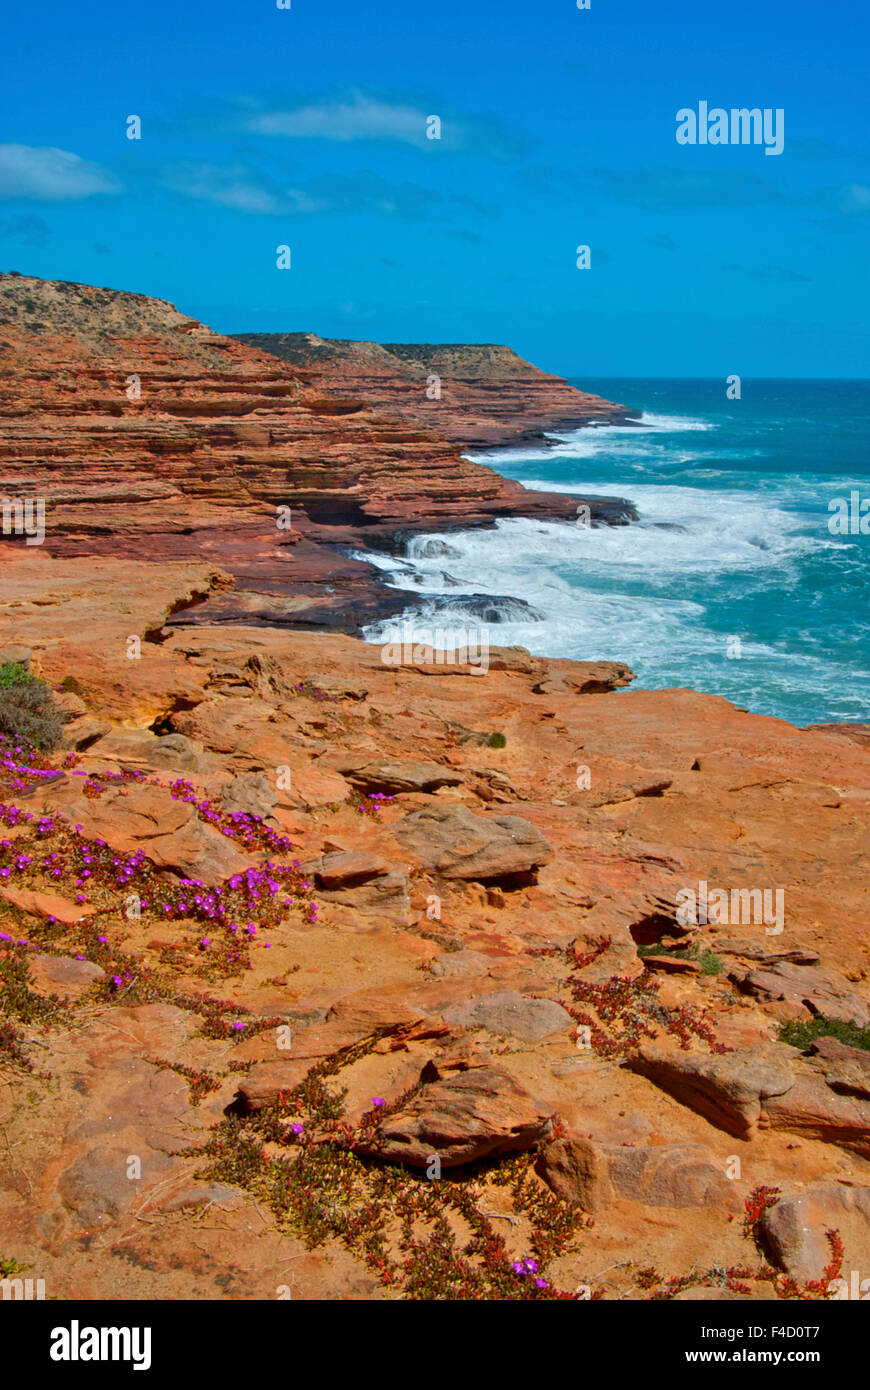 Layered cliffs of red rock rise up from the turquoise waters of the Indian Ocean. Wildflowers grace the foreground Stock Photo